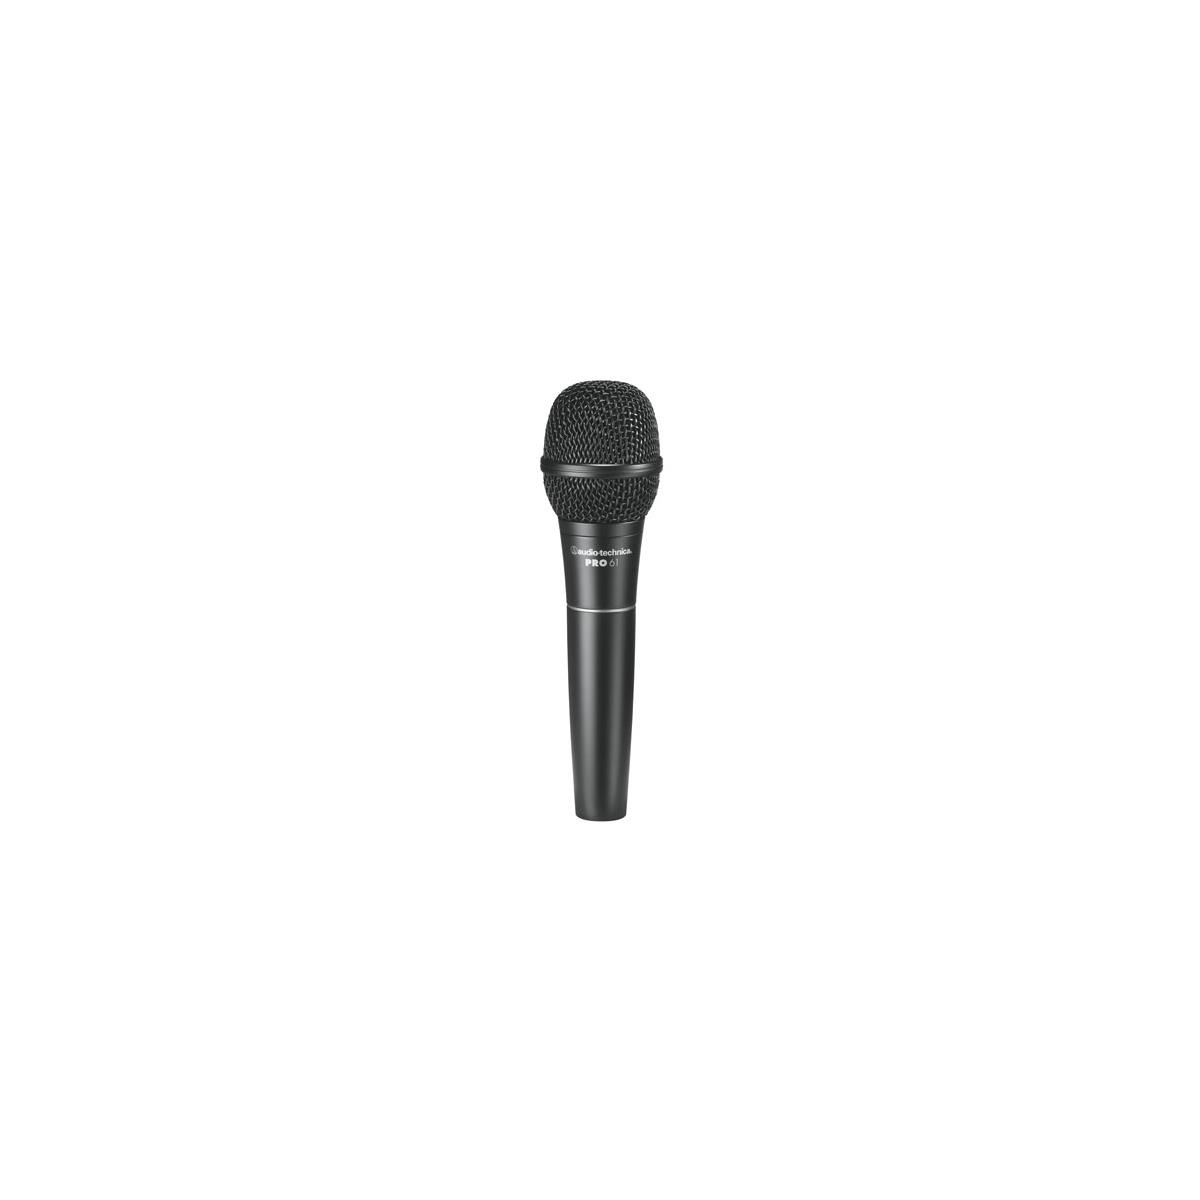 Image of Audio-Technica PRO61 Hypercardioid Dynamic Handheld Microphone